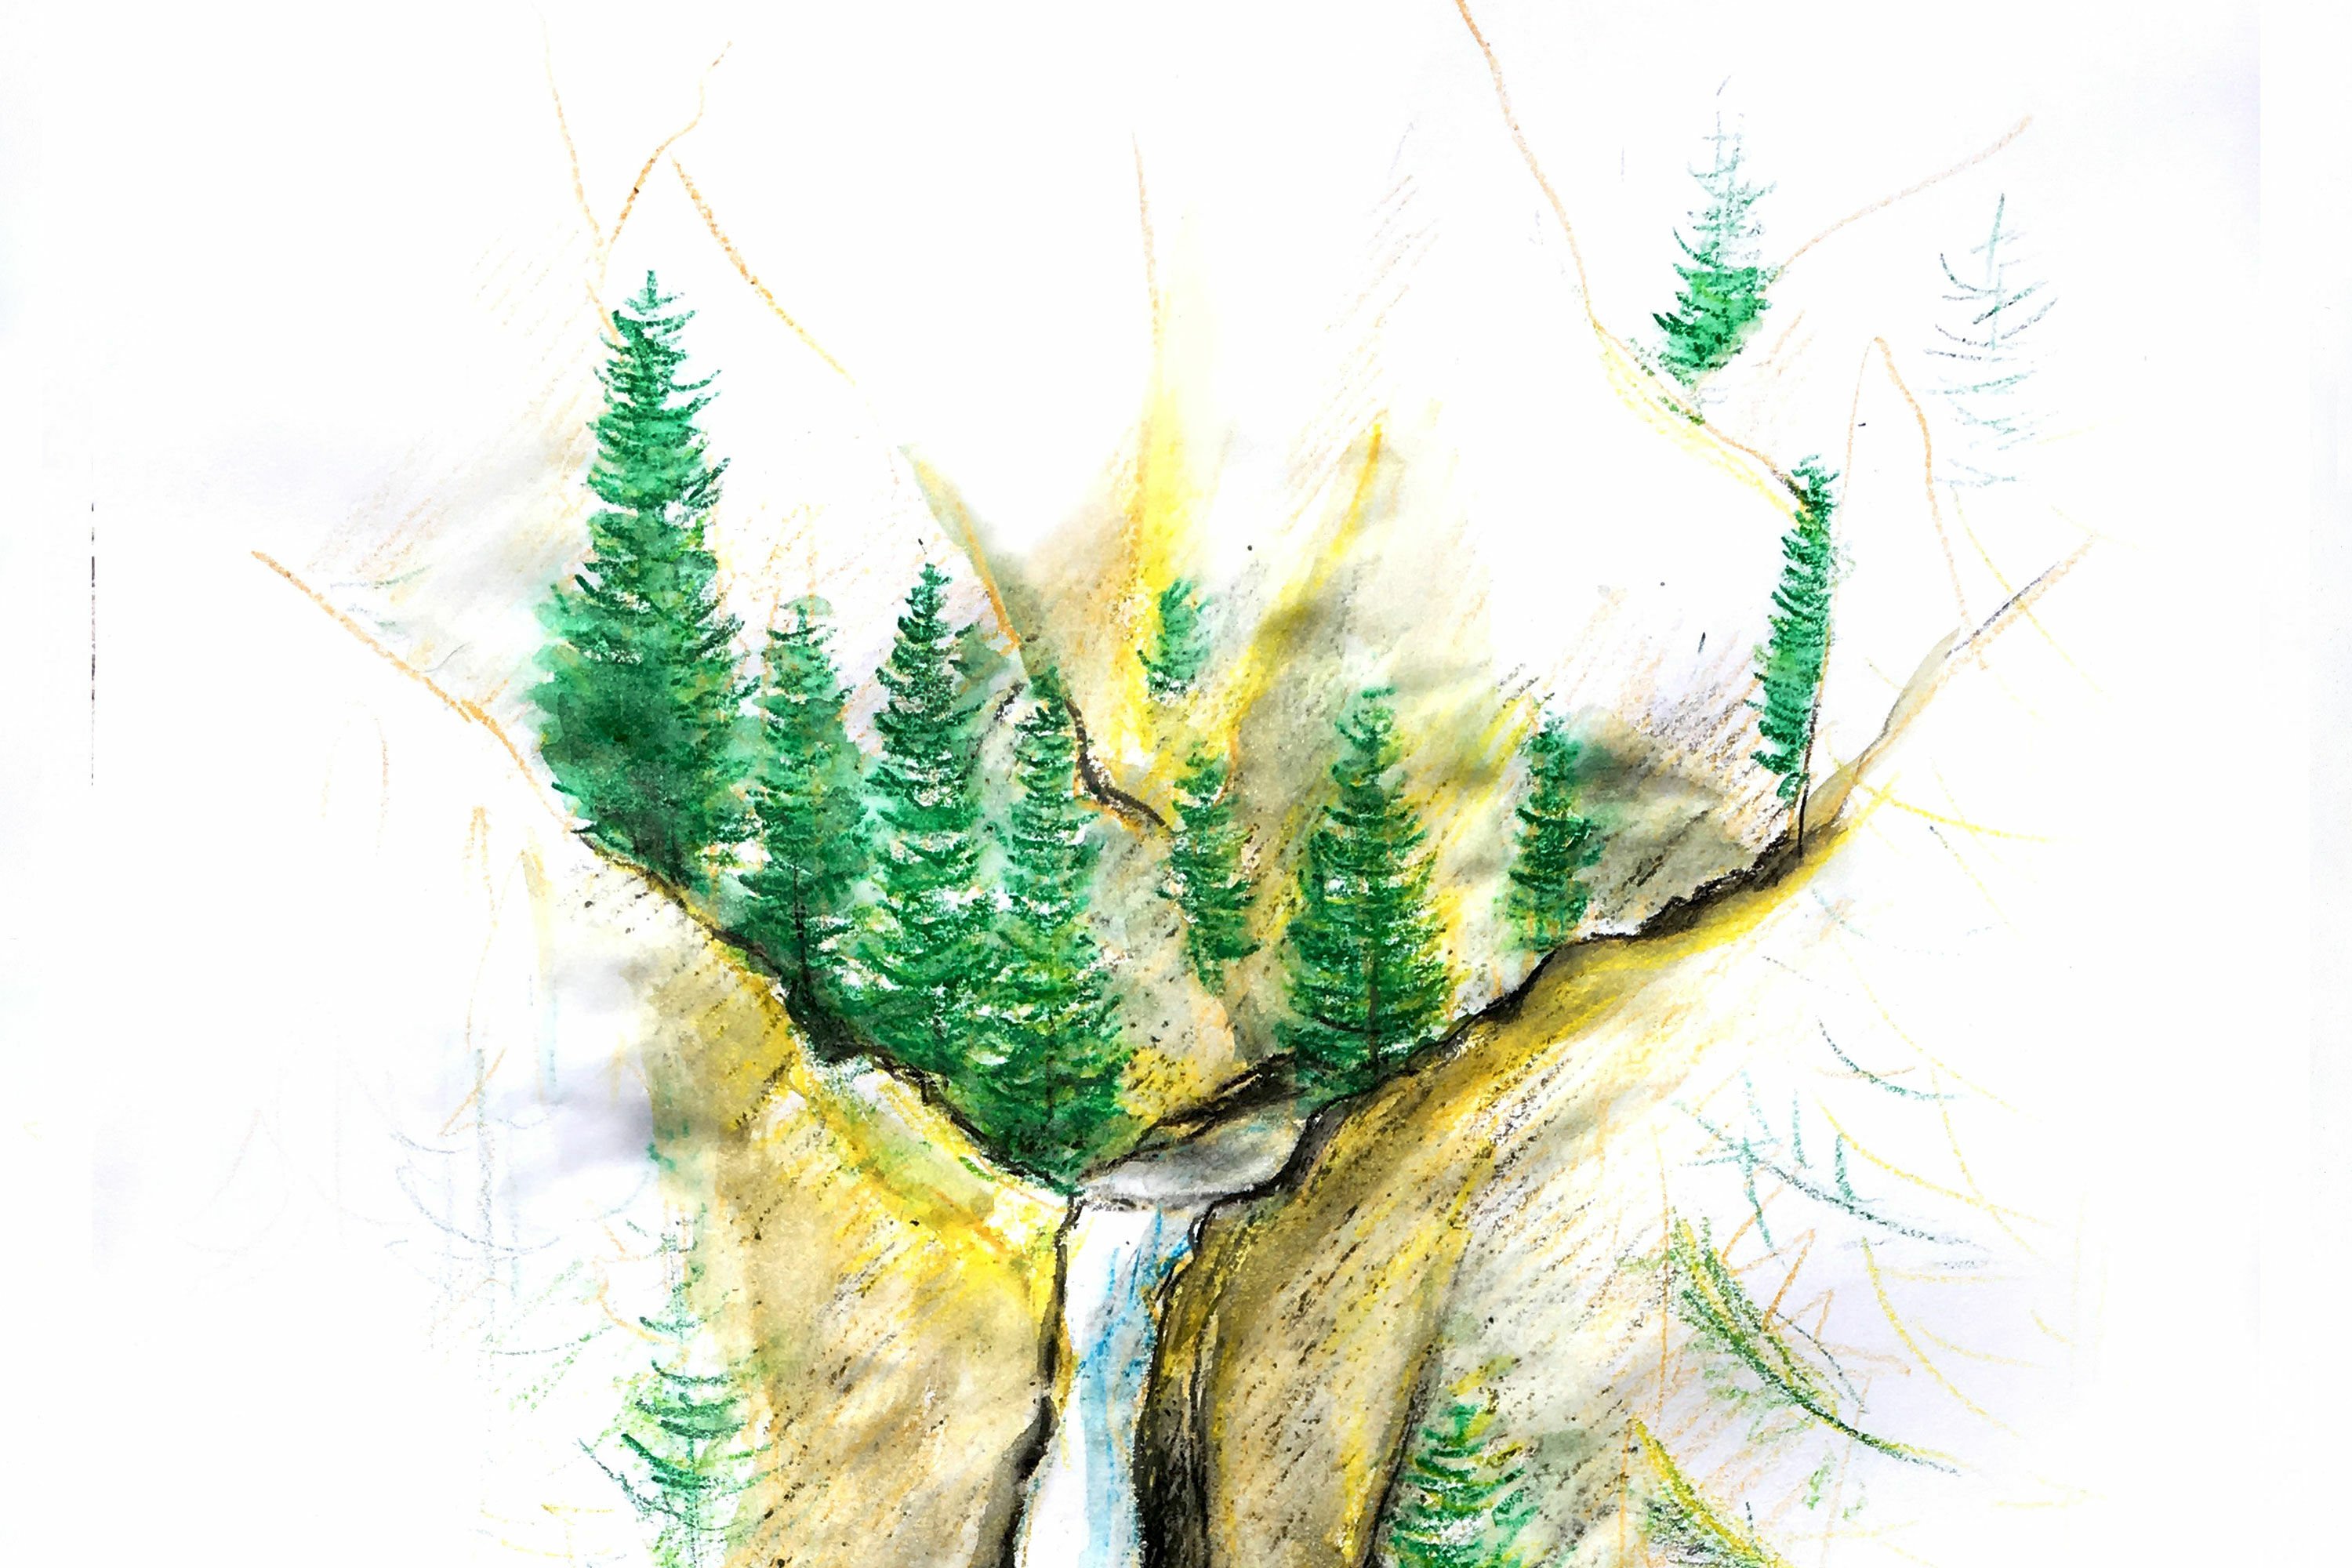 Waterfalls Painting using Water Colour – Meghnaunni.com